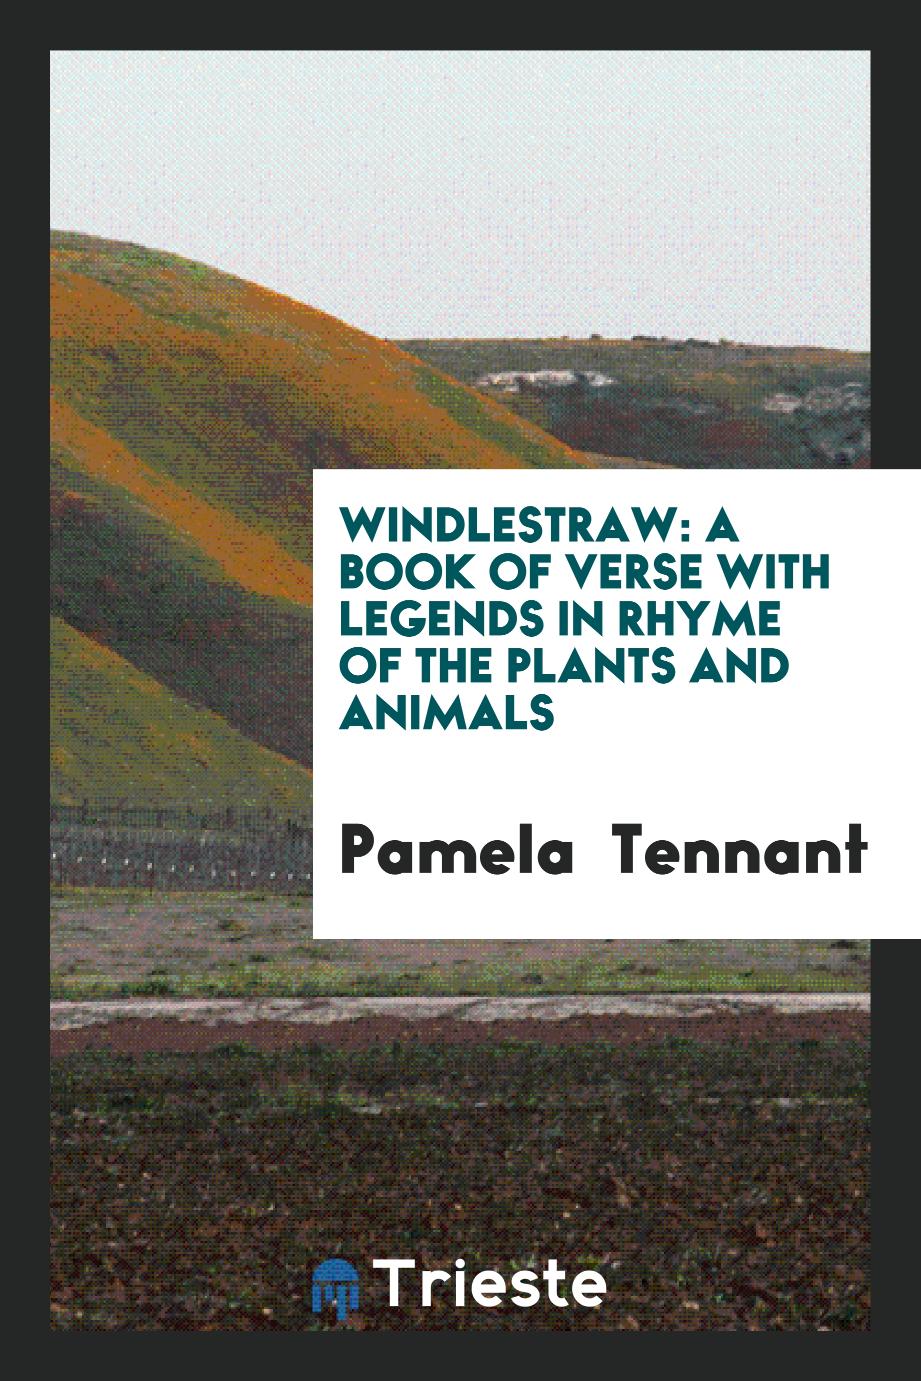 Windlestraw: A Book of Verse with Legends in Rhyme of the Plants and Animals